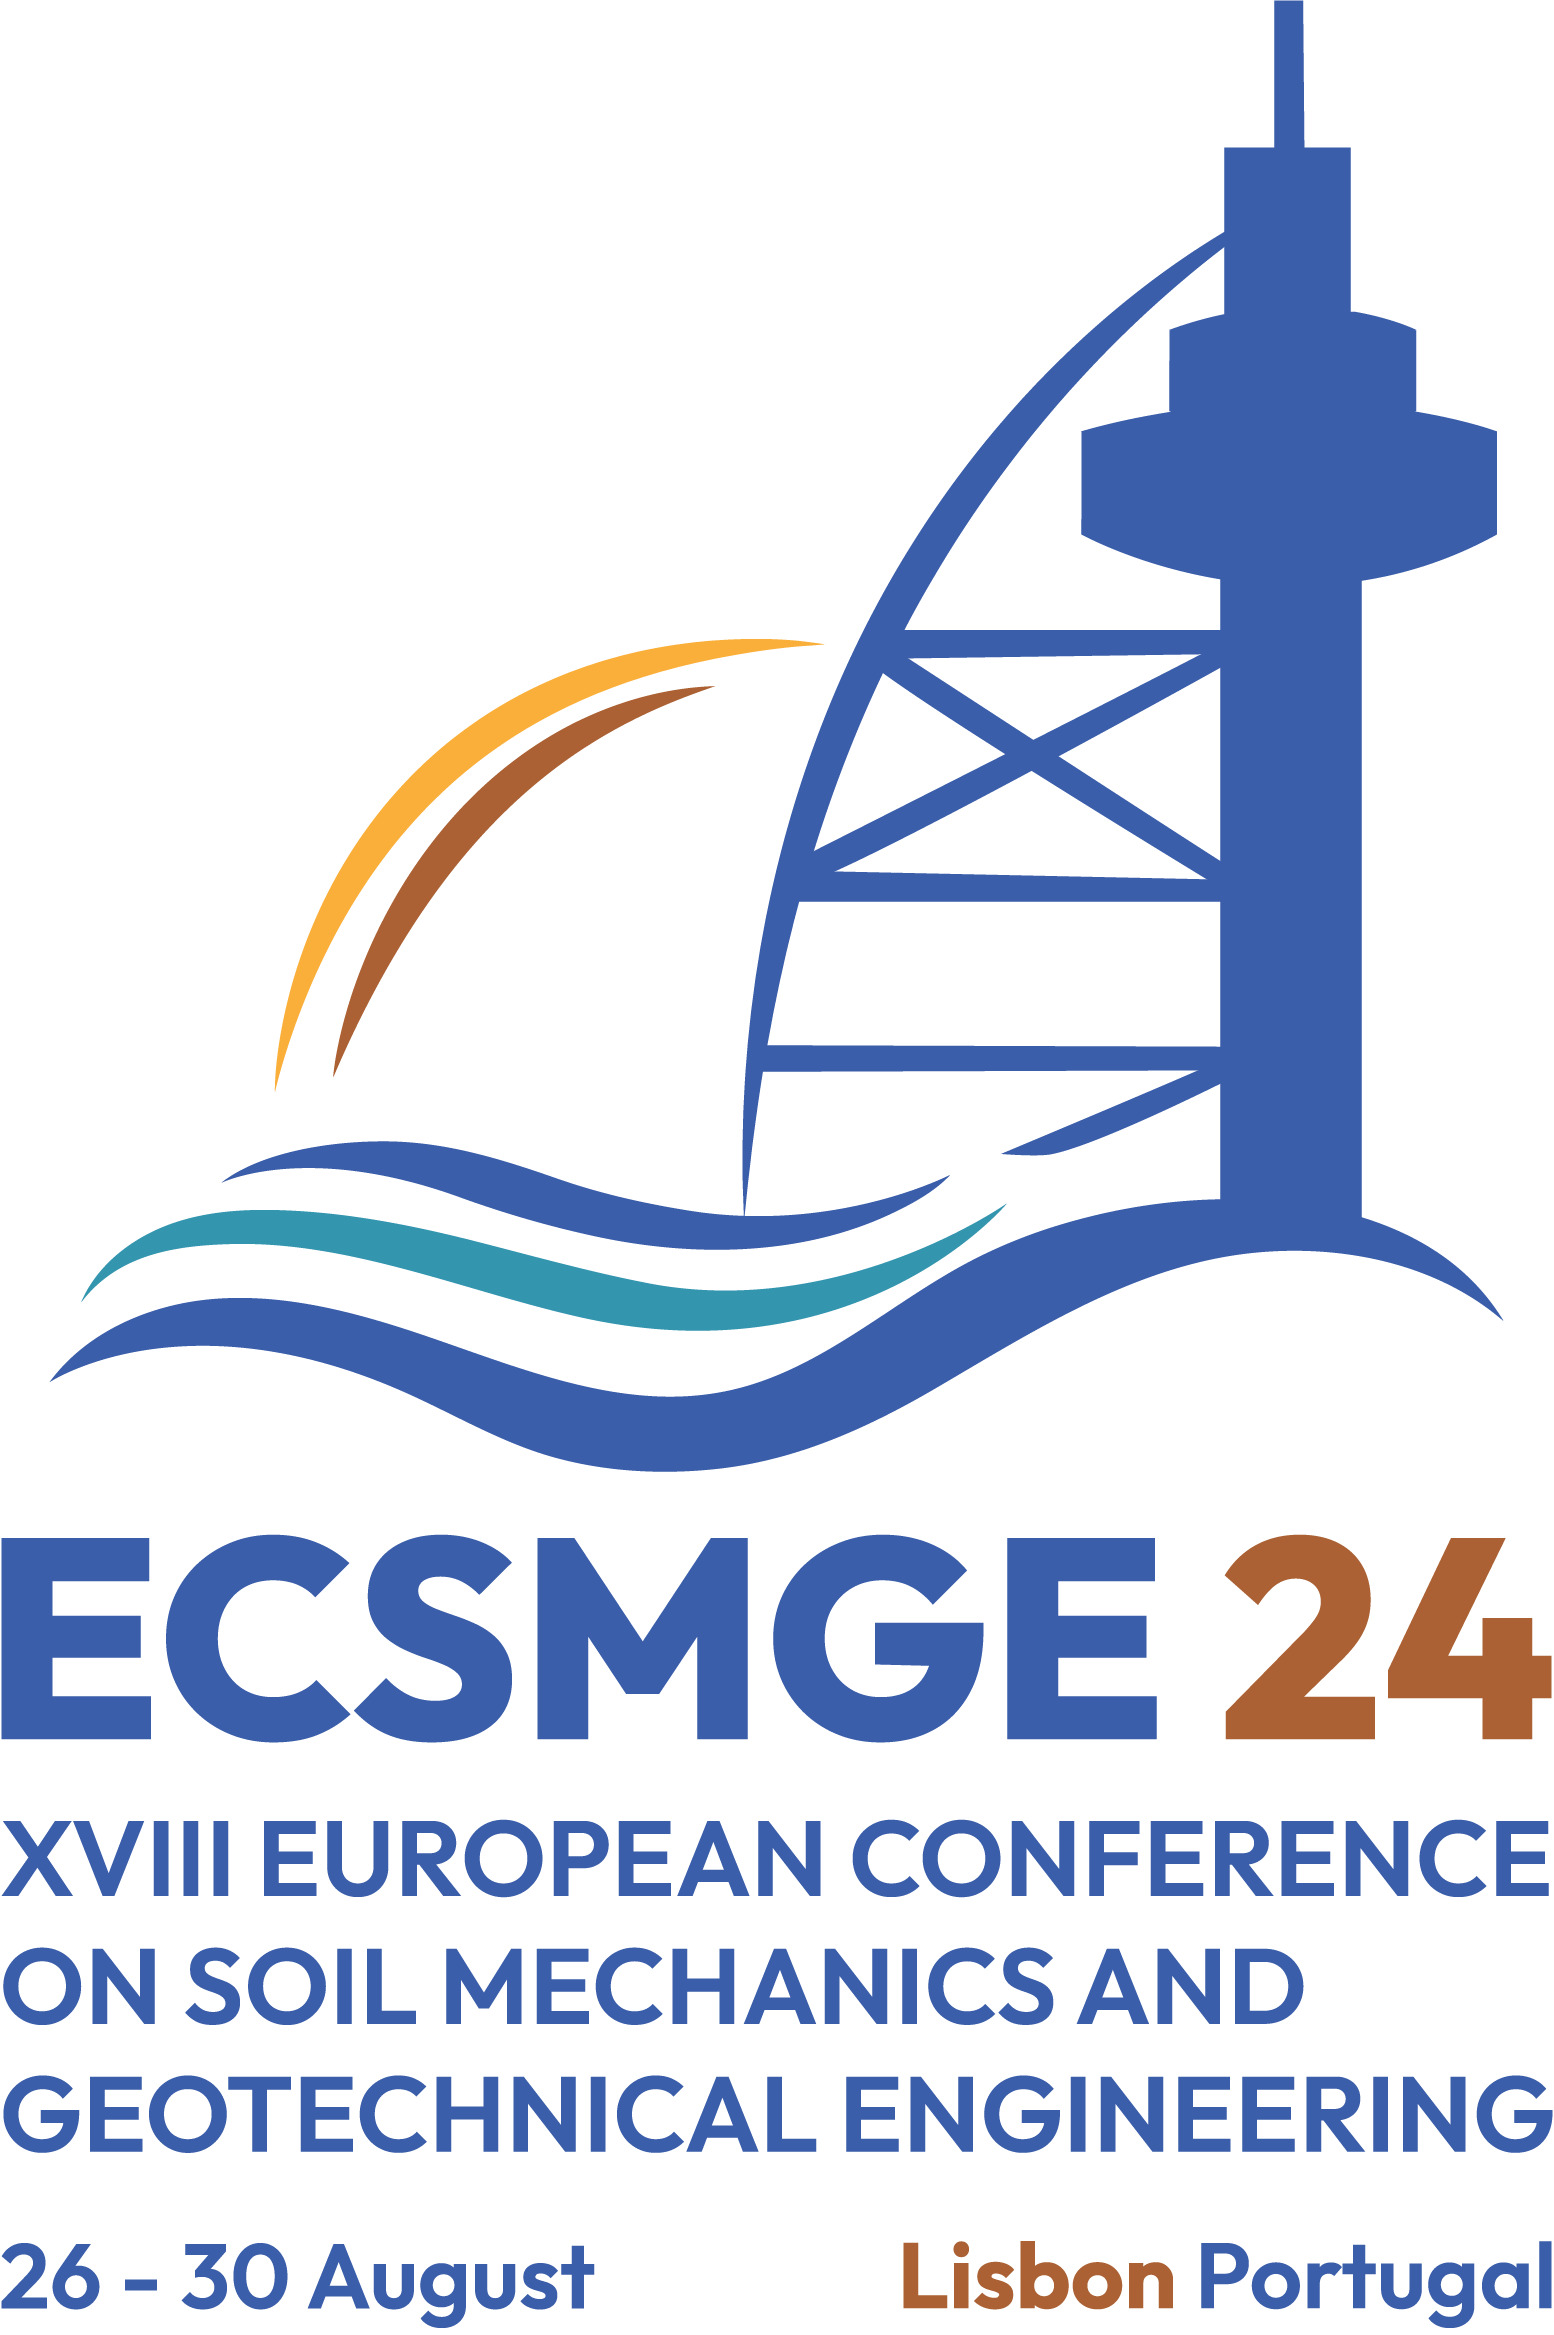 XVIII EUROPEAN CONFERENCE ON SOIL MECHANICS AND GEOTECHNICAL ENGINEERING